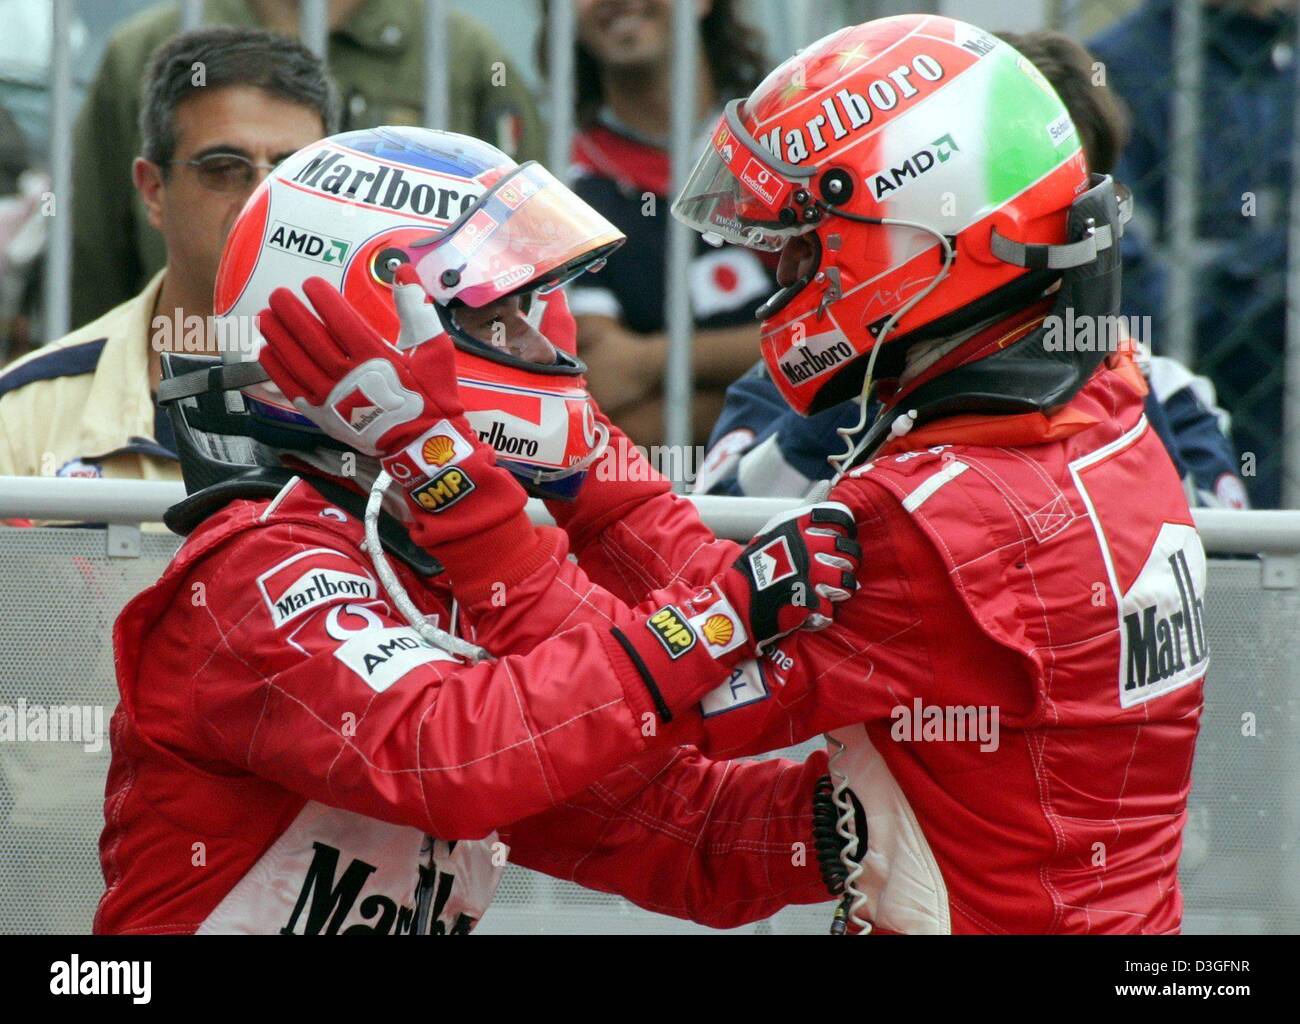 (dpa) - Ferrari Formula 1 drivers Rubens Barrichello (L) from Brazil and his German teammate Michael Schumacher (R) jubilate after the end of the Italian Grand Prix in Monza, Italy, 12 September 2004. Barrichello won the race with Schumacher coming in second to give Ferrari its 9th 1-2 finish of the current racing season. Stock Photo